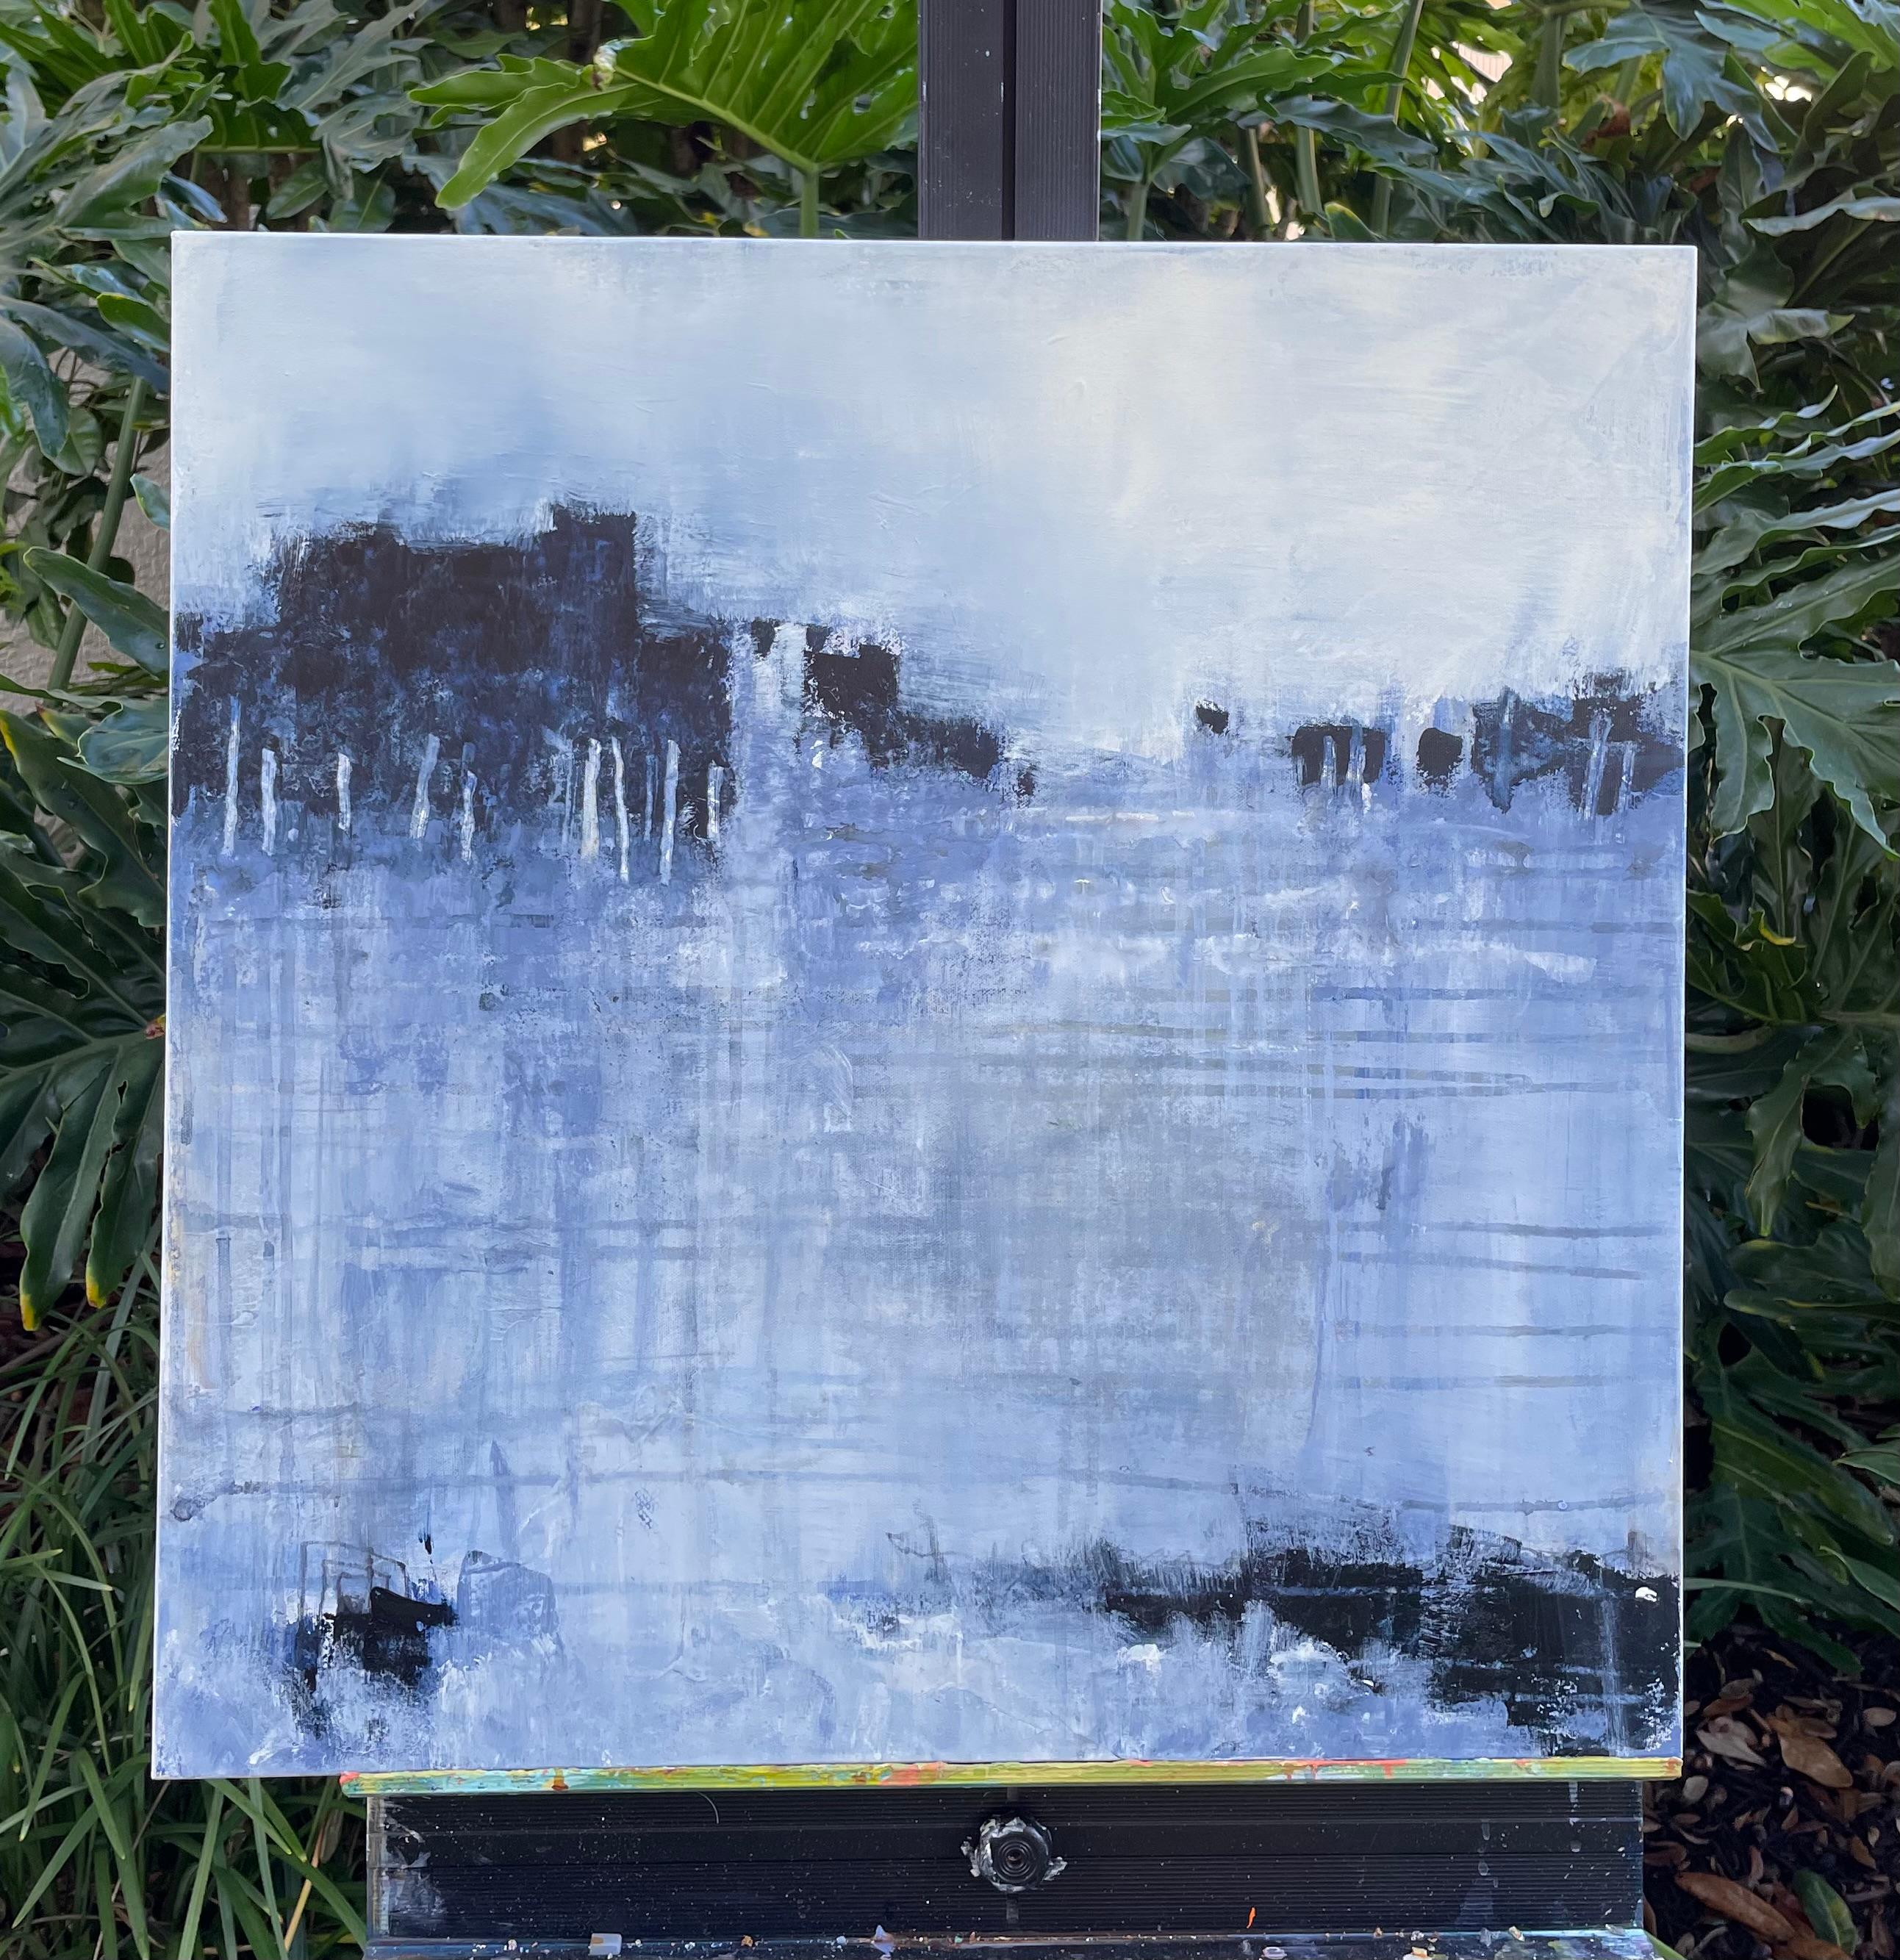 <p>Artist Comments<br>A divergent saturation of navy blue extends artist Pat Forbes' soothing abstract landscape. The fog blankets the bay on a cold fall day in New England. It coats the world in a cozy cottony haze, making everything feel out of